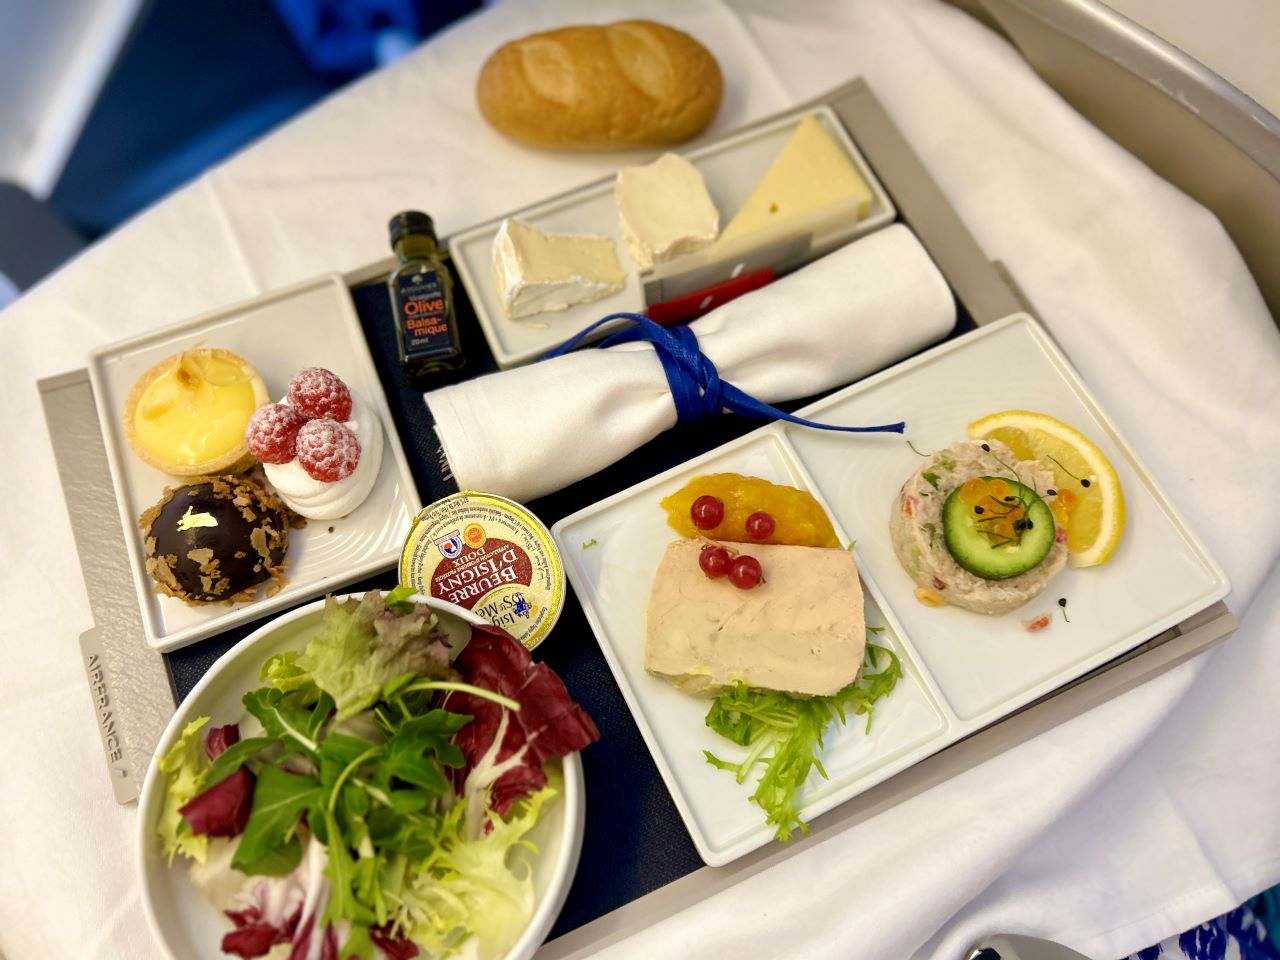 This Week in Travel Episode 10 – Air France Business Class and Virgin status with Skyteam